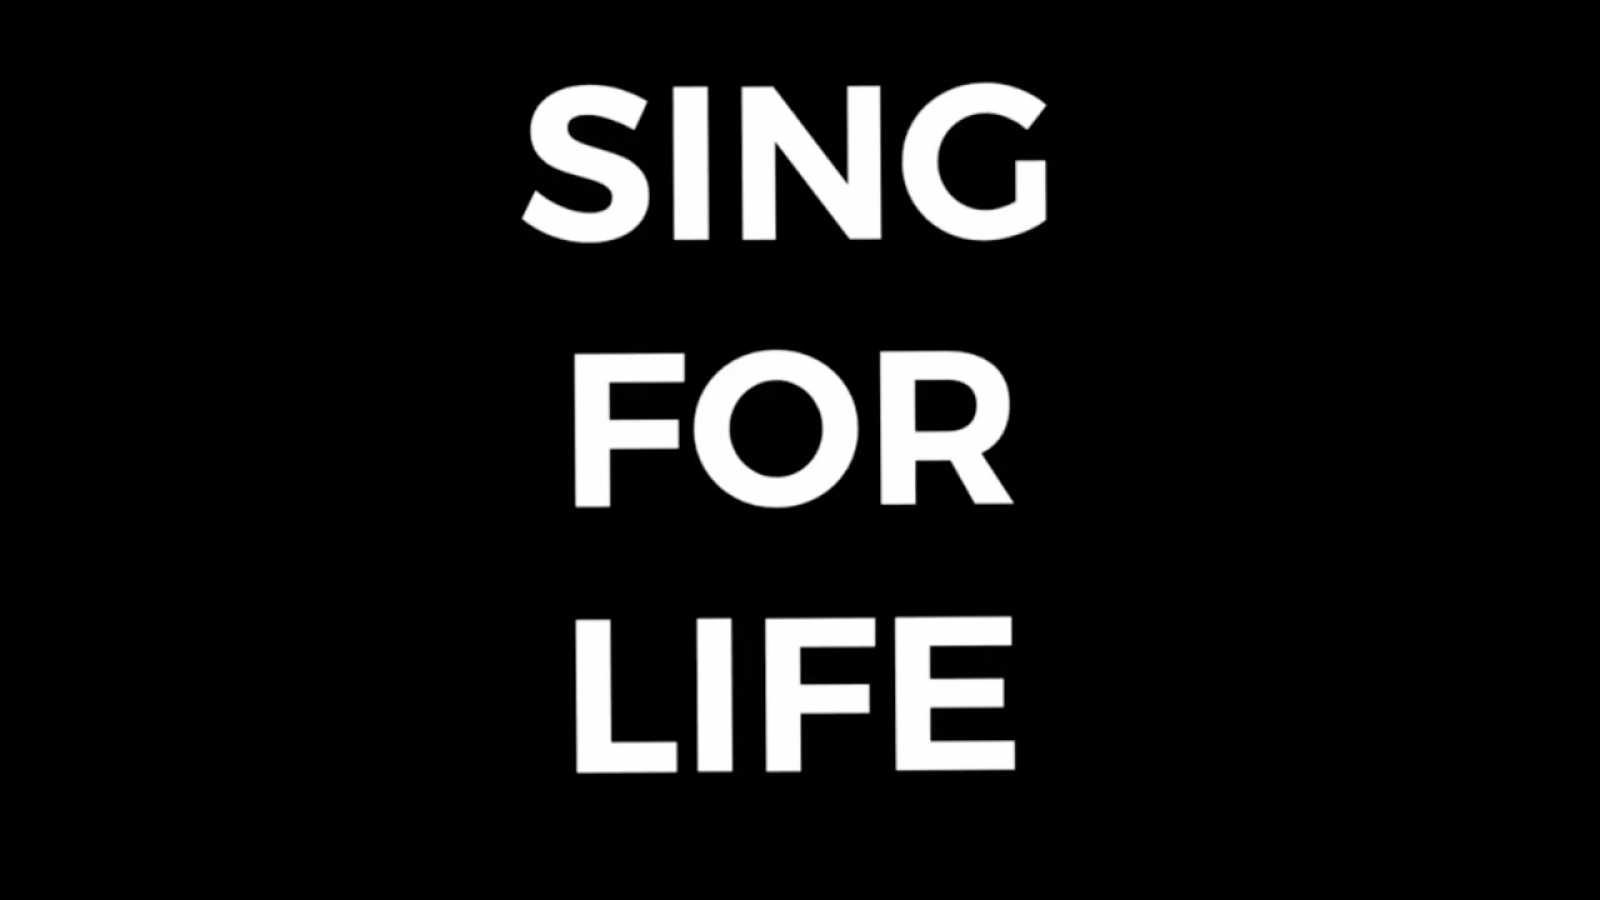 YOSHIKI Collaborates with Bono, will.i.am, and Jennifer Hudson for #SING4LIFE © SING4LIFE